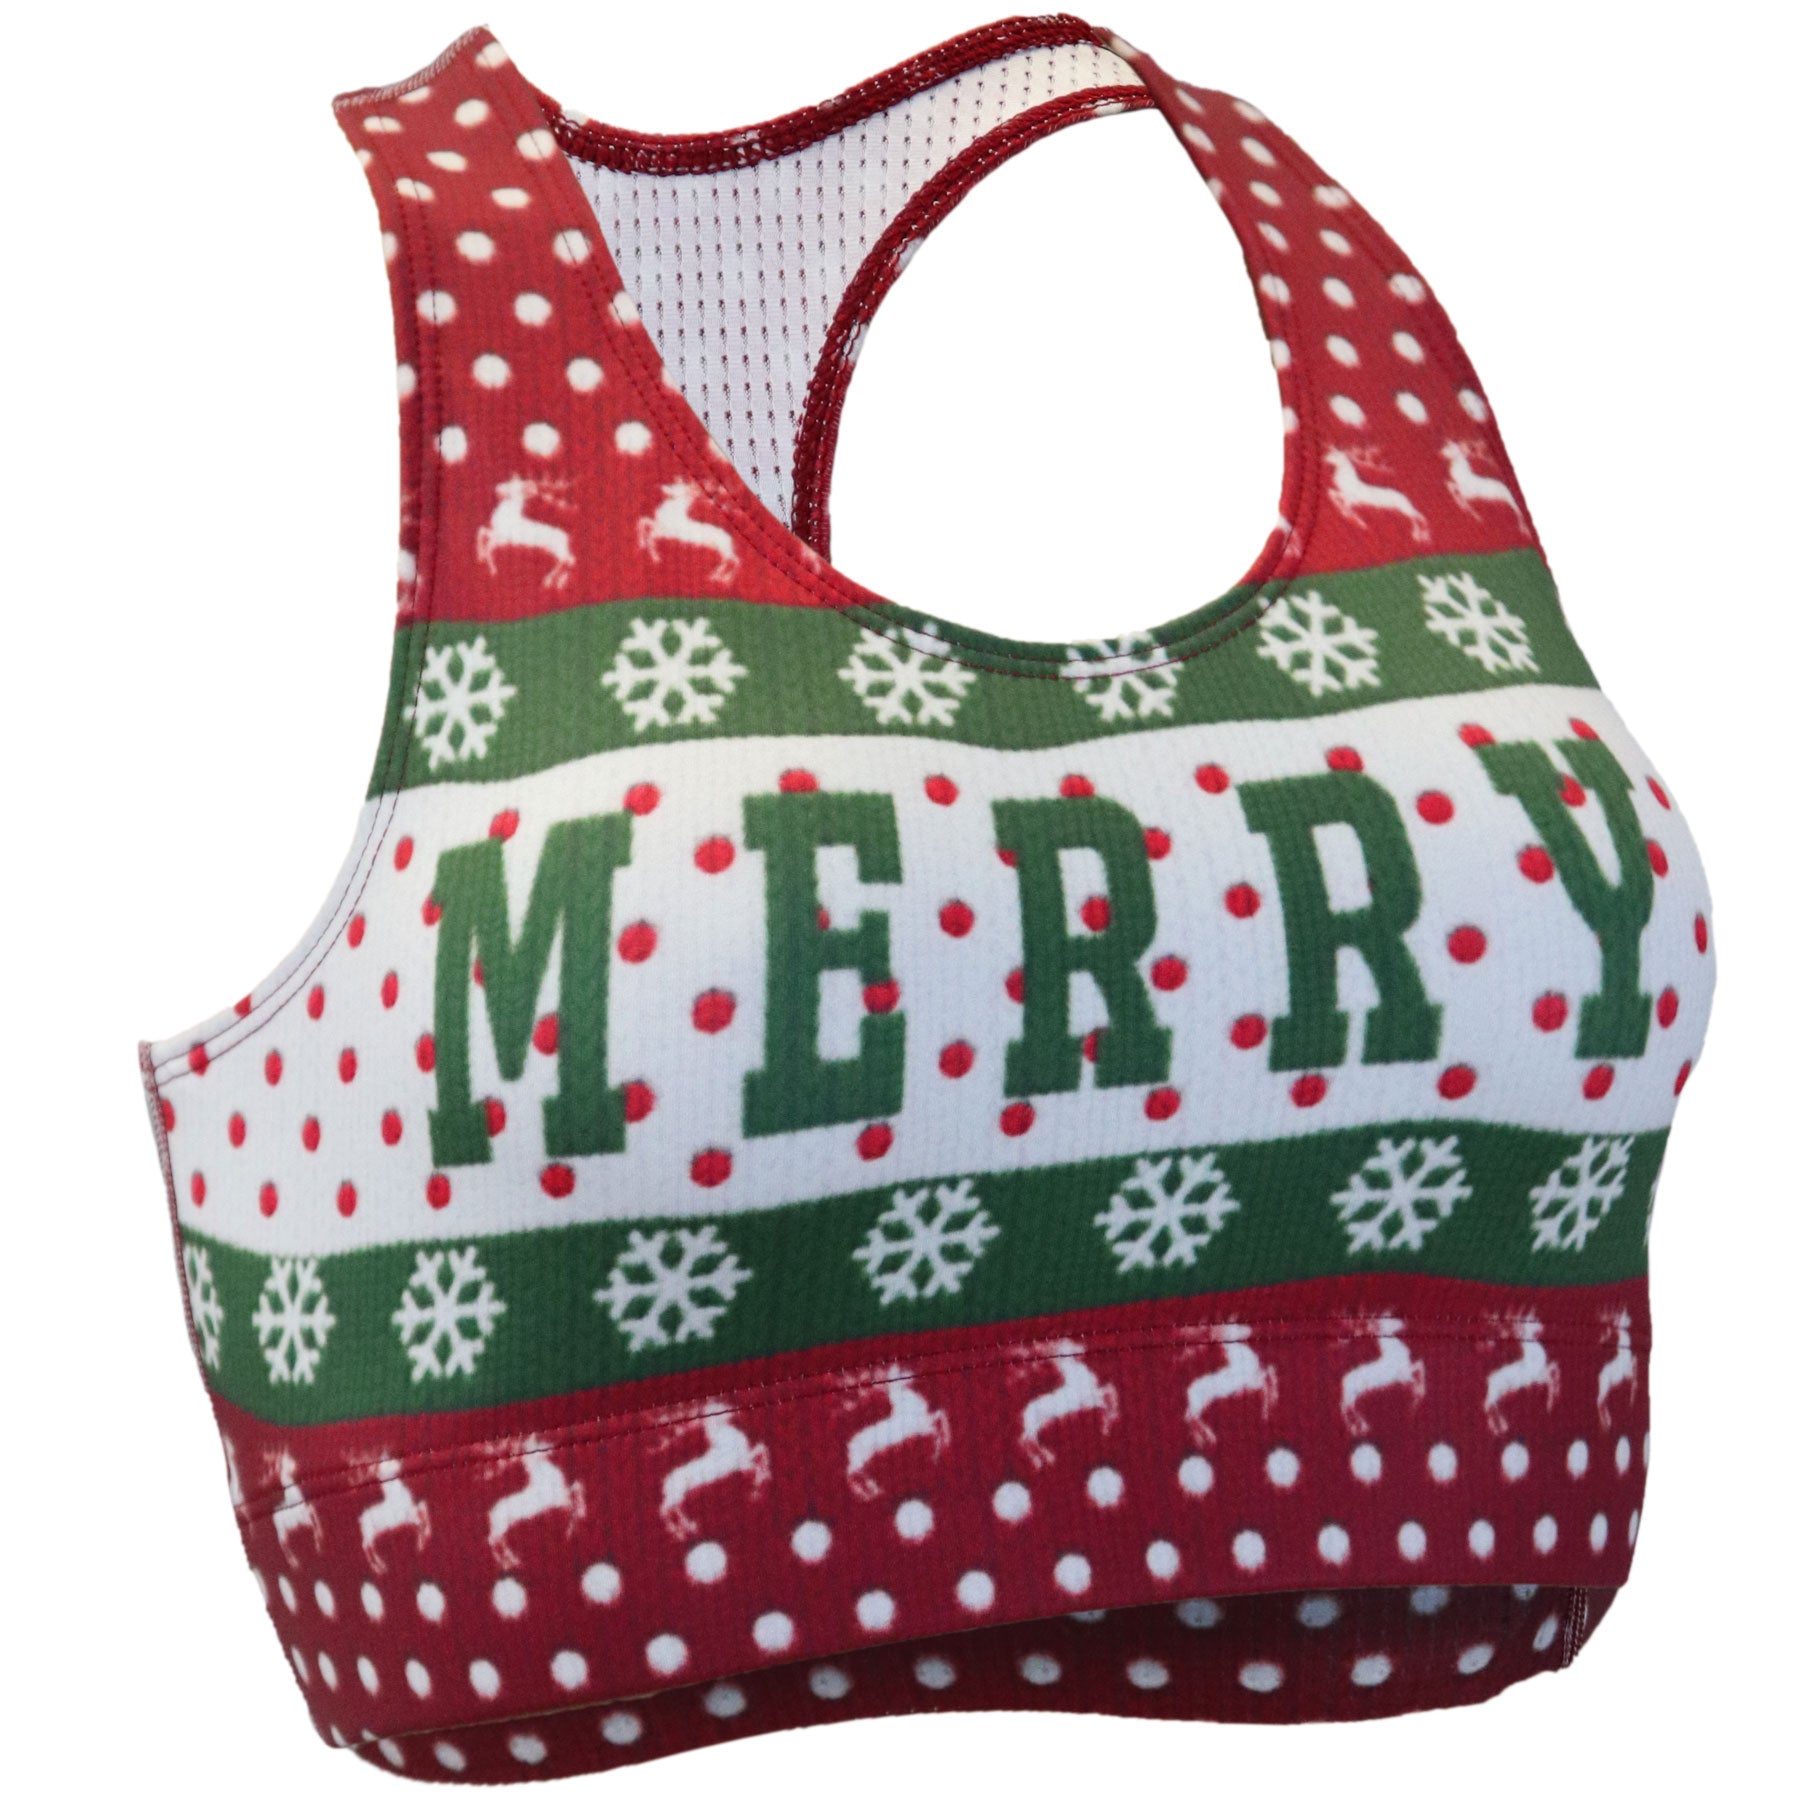 Women's Sports Bra Red Ugly Christmas Red/Green/White